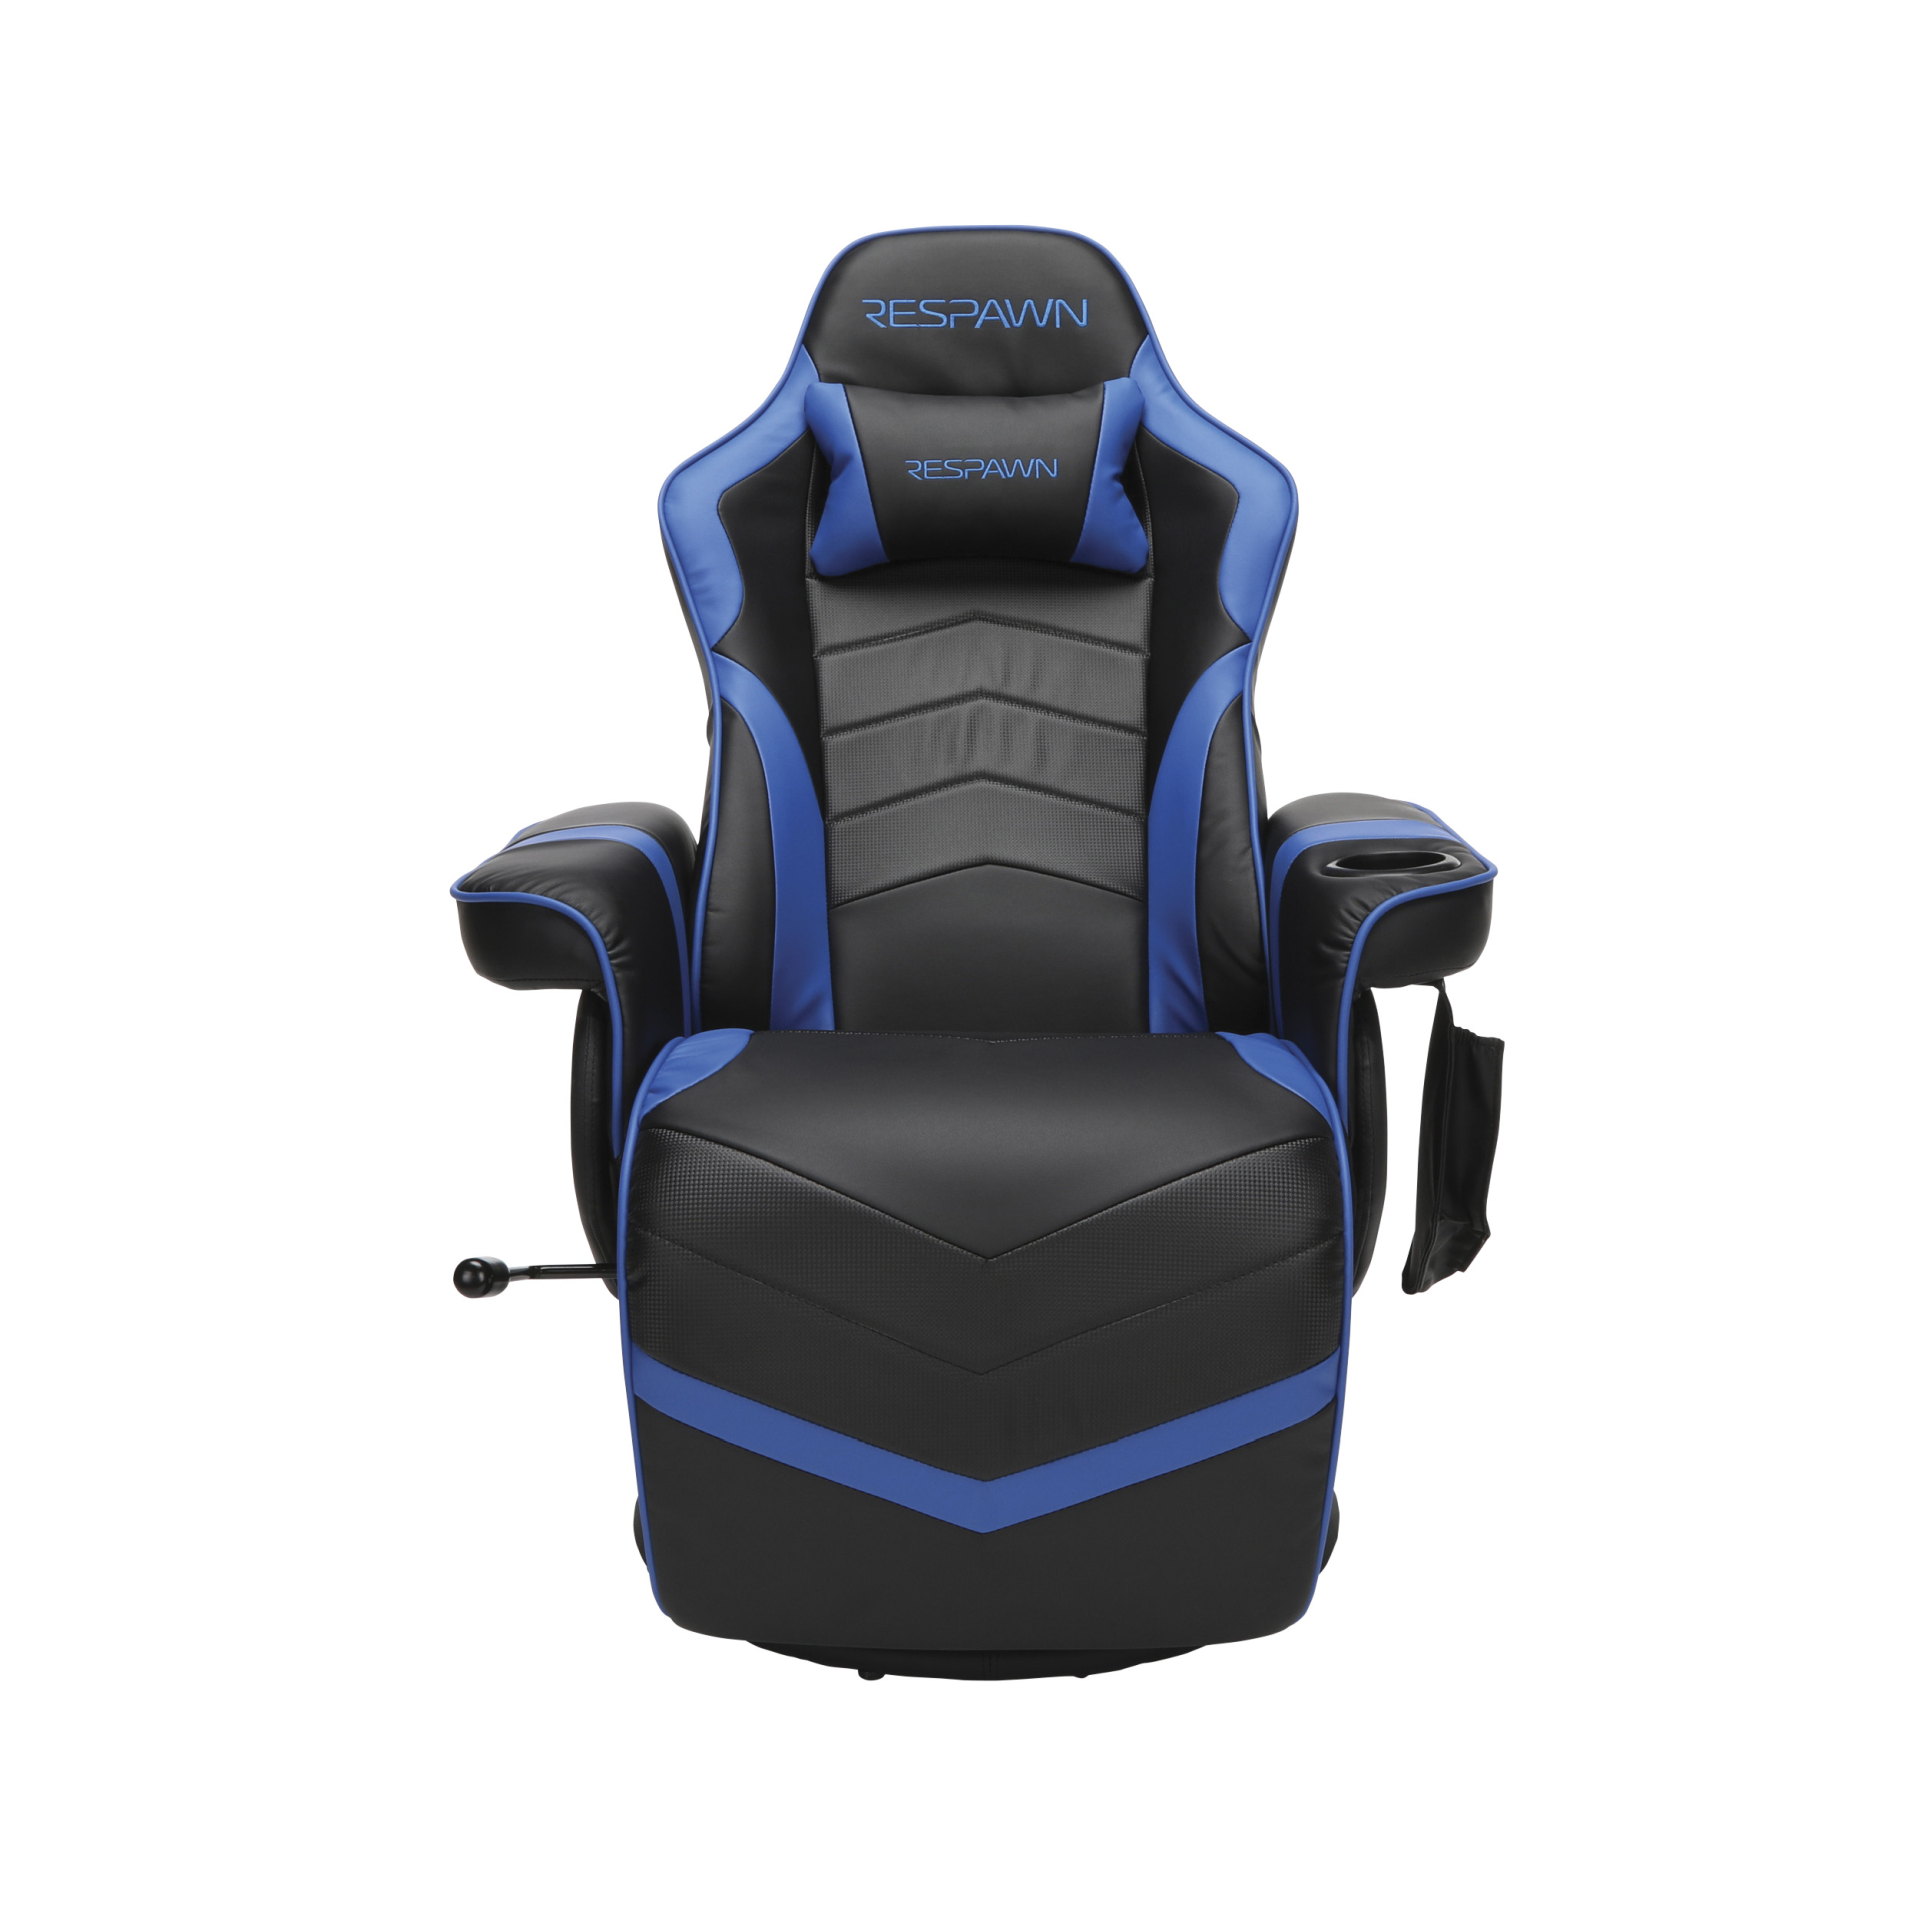 RESPAWN RSP-900 Gaming Recliner #10